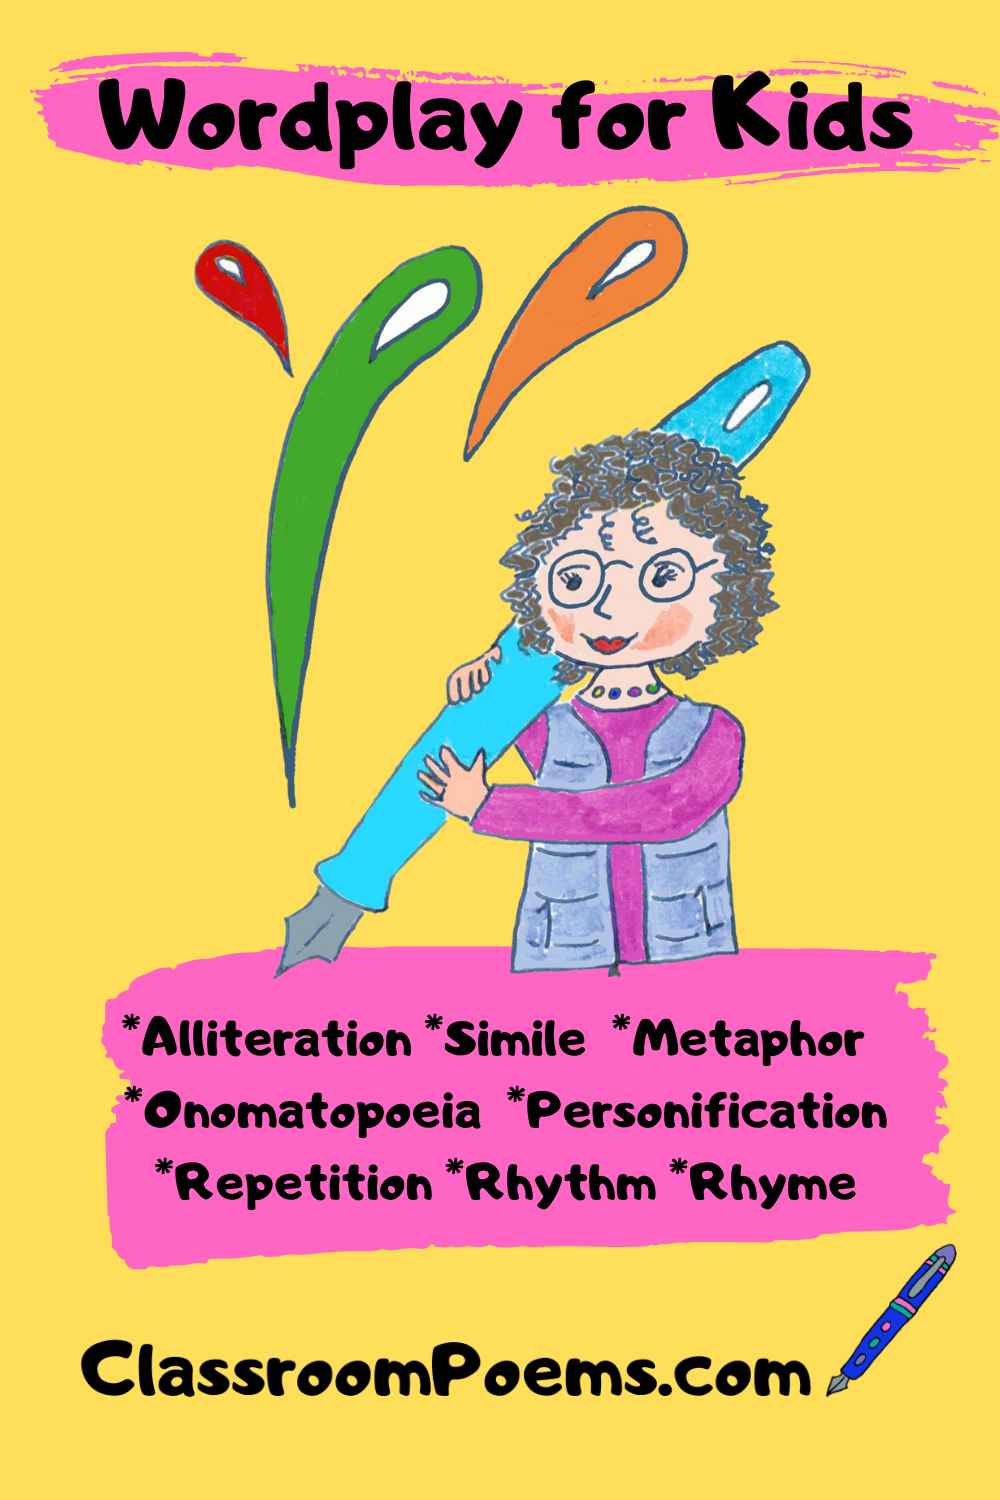 Wordplay for kids by Denise Rodgers on ClassroomPoems.com. Includes alliteration, simile, metaphor, ohomatopoeia, personification, rhyme, repetition, and more.